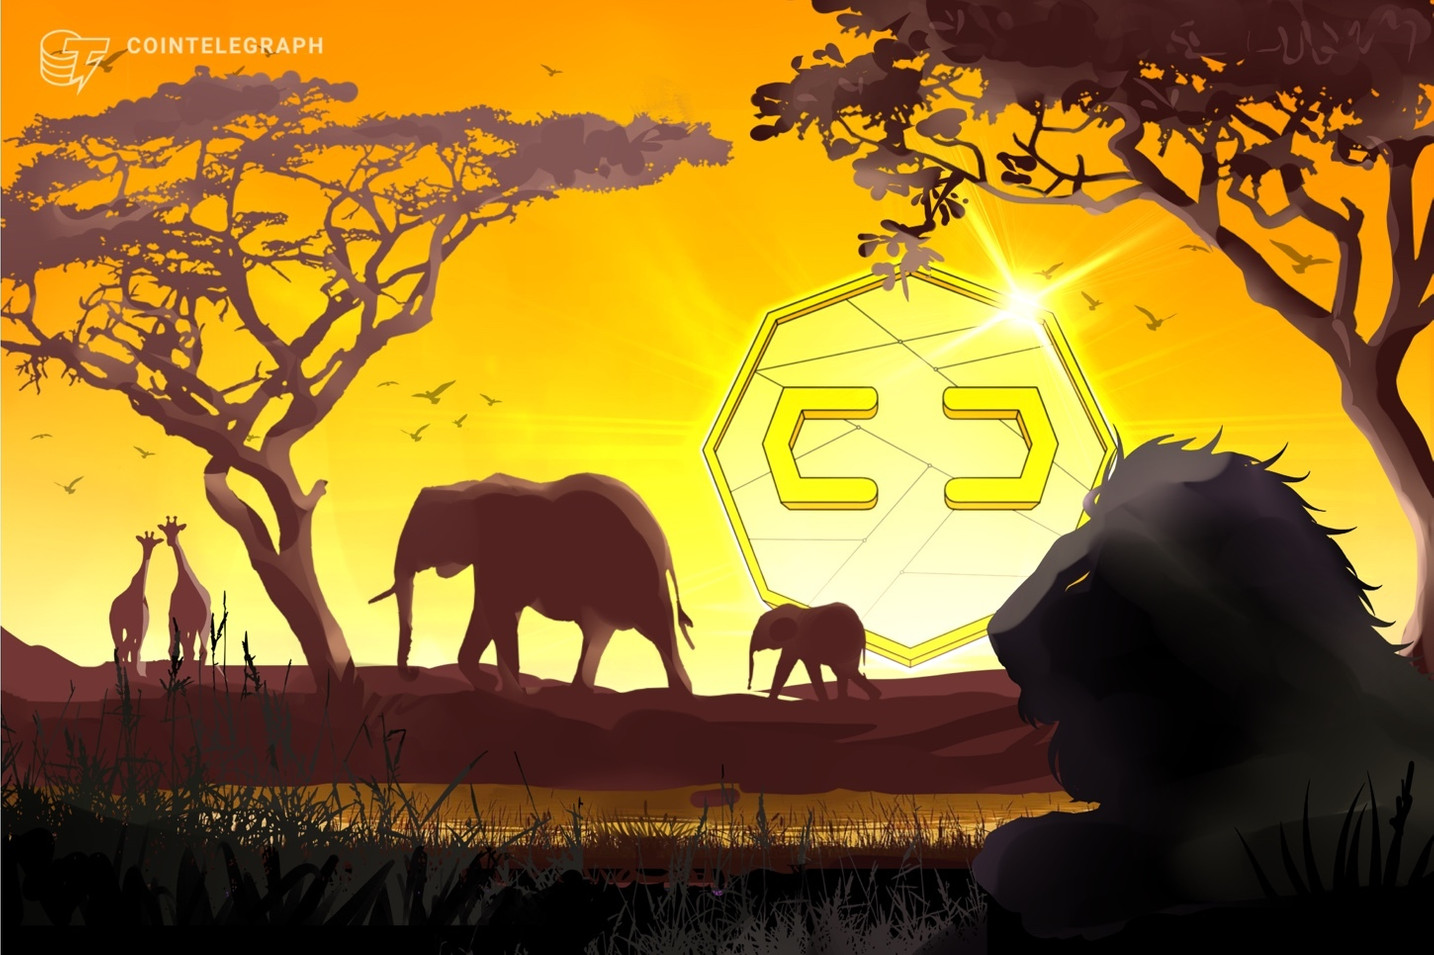 Bitcoin mining project in Kenya helps power rural community